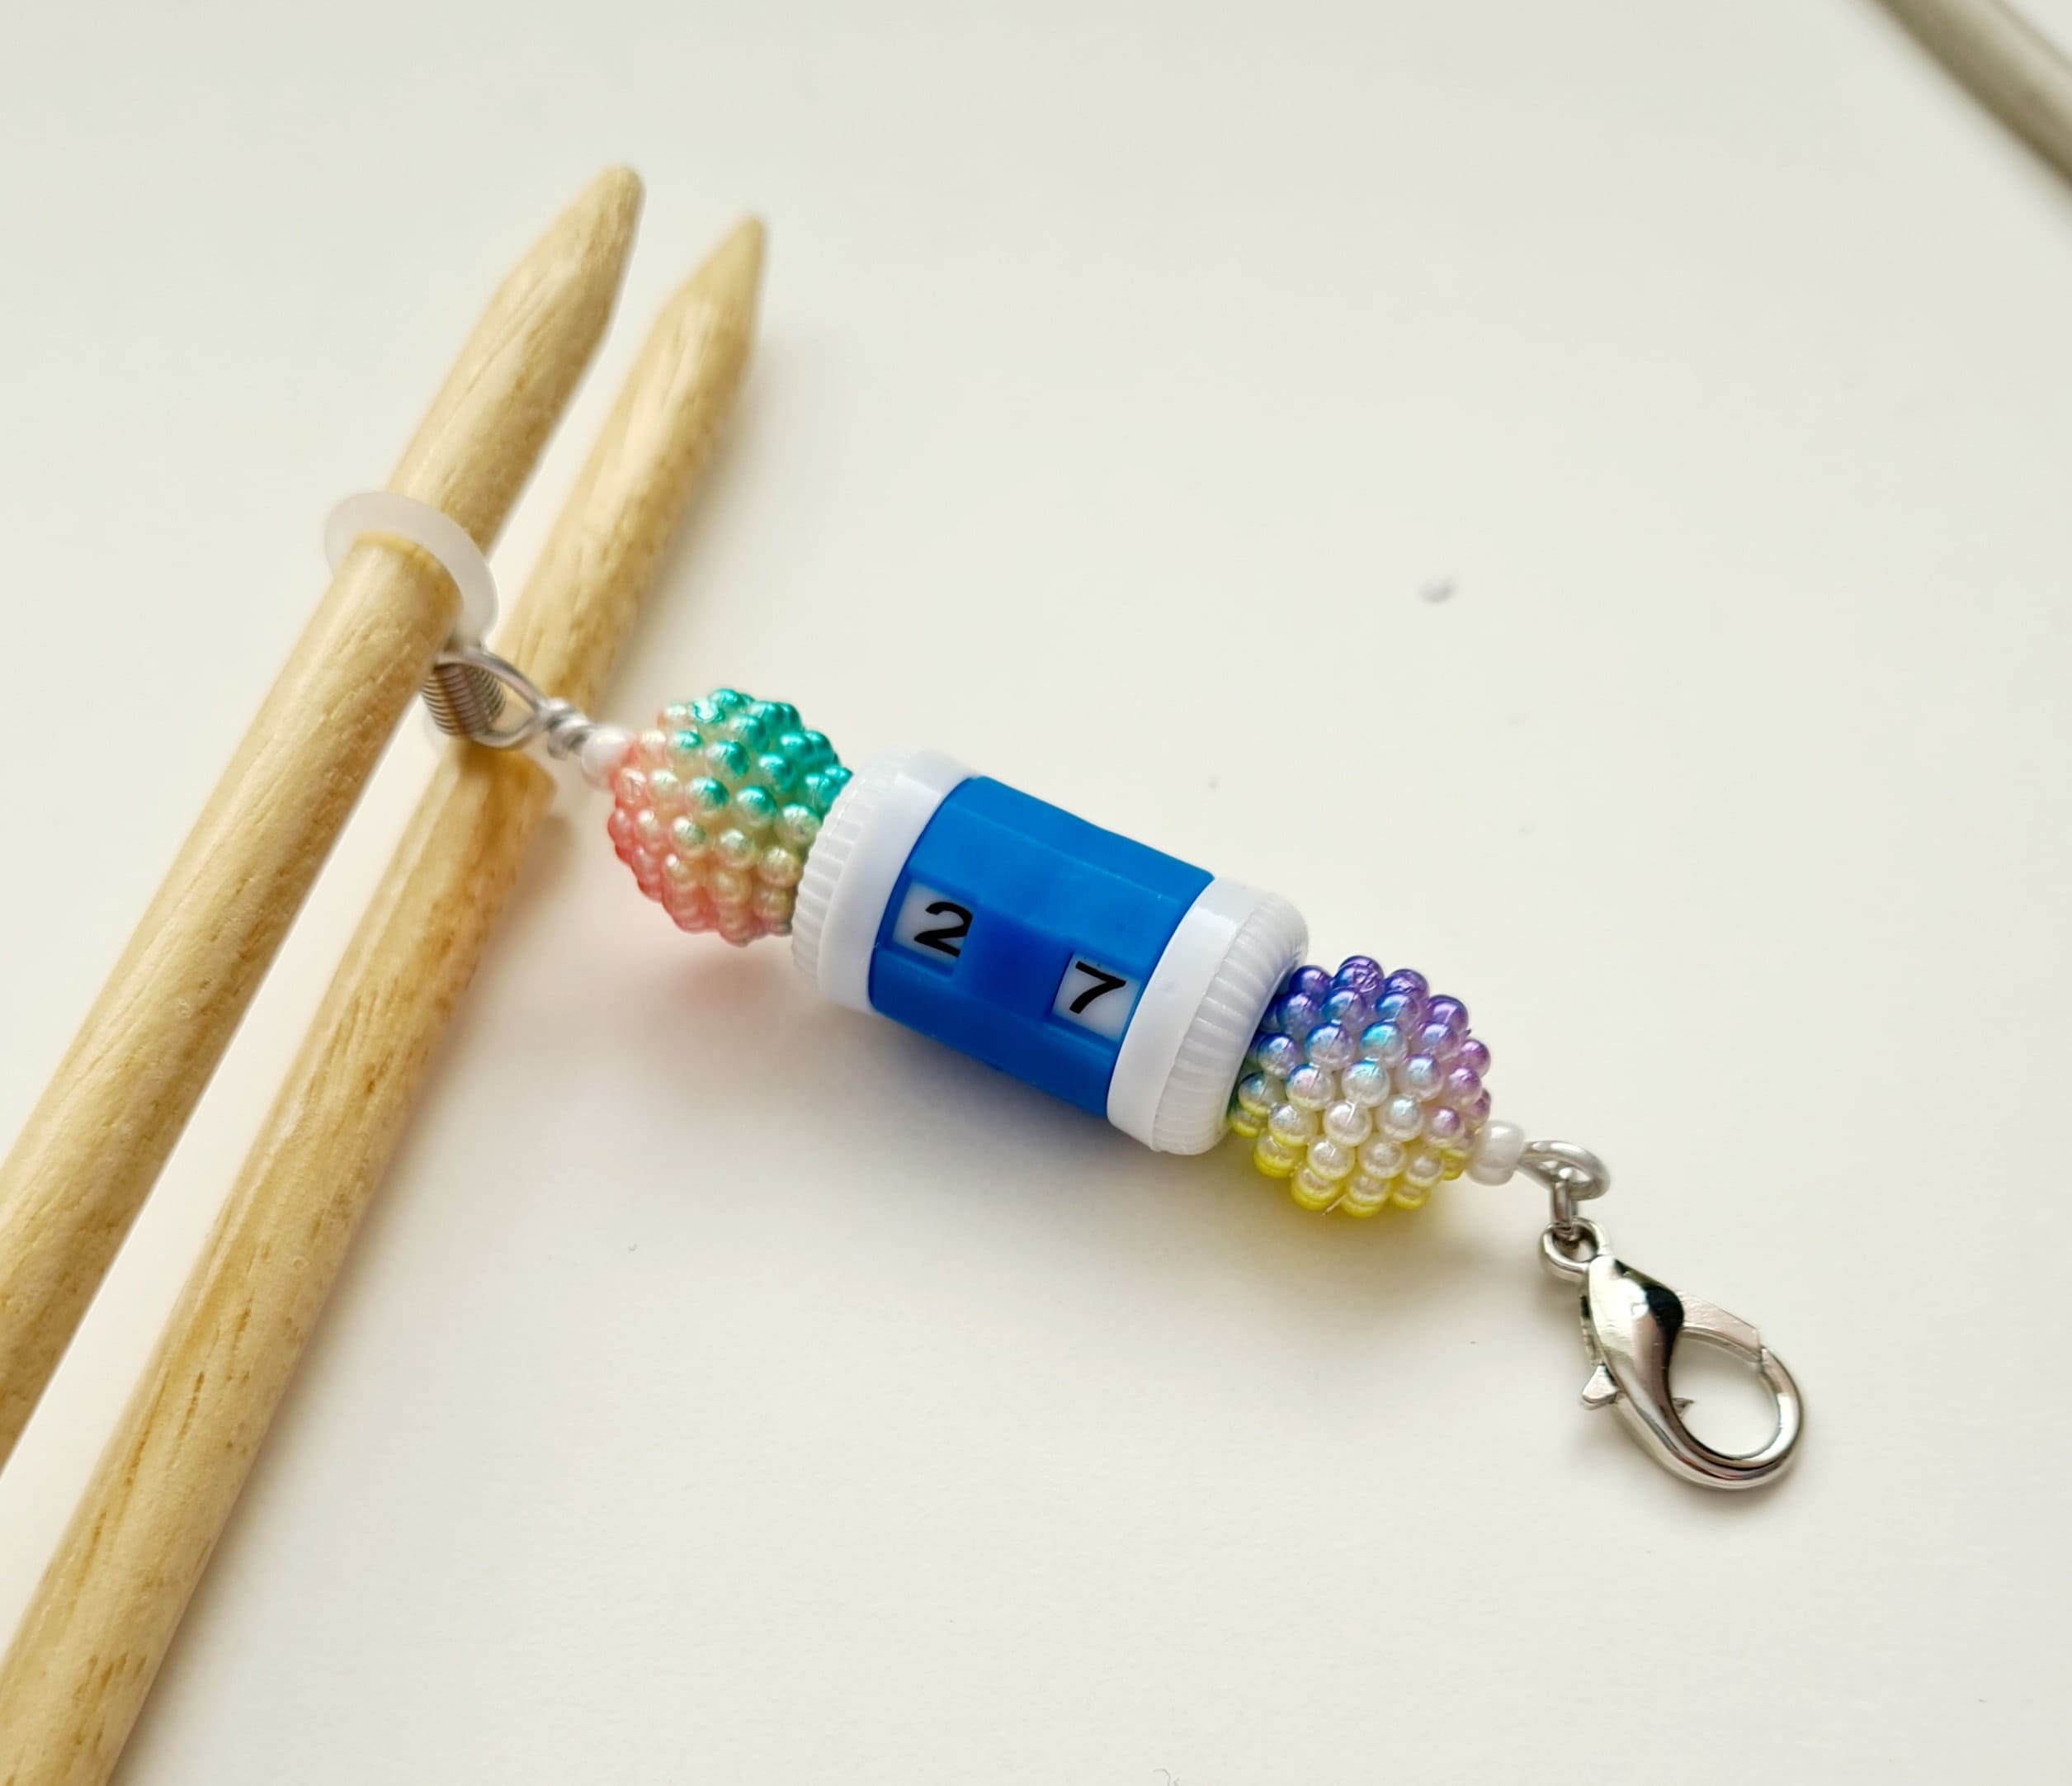 Stitch Marker Row Counter, Knitting Row Counter, Crochet Row Counter, Gift  for Crocheter, Gift for Knitter 